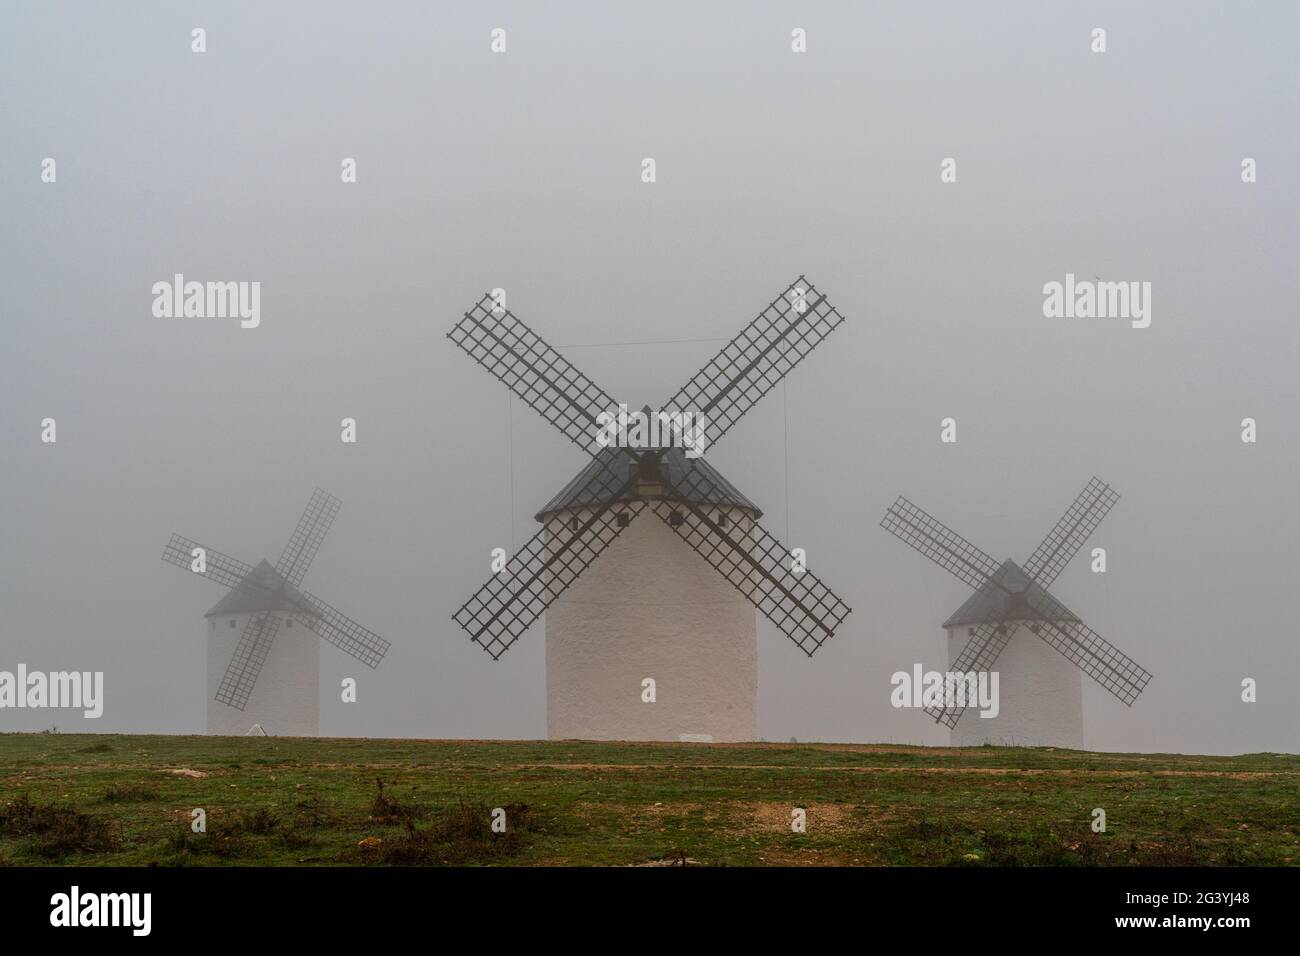 A view of the windmills of Campo de Criptana in La Mancha on a very foggy morning Stock Photo